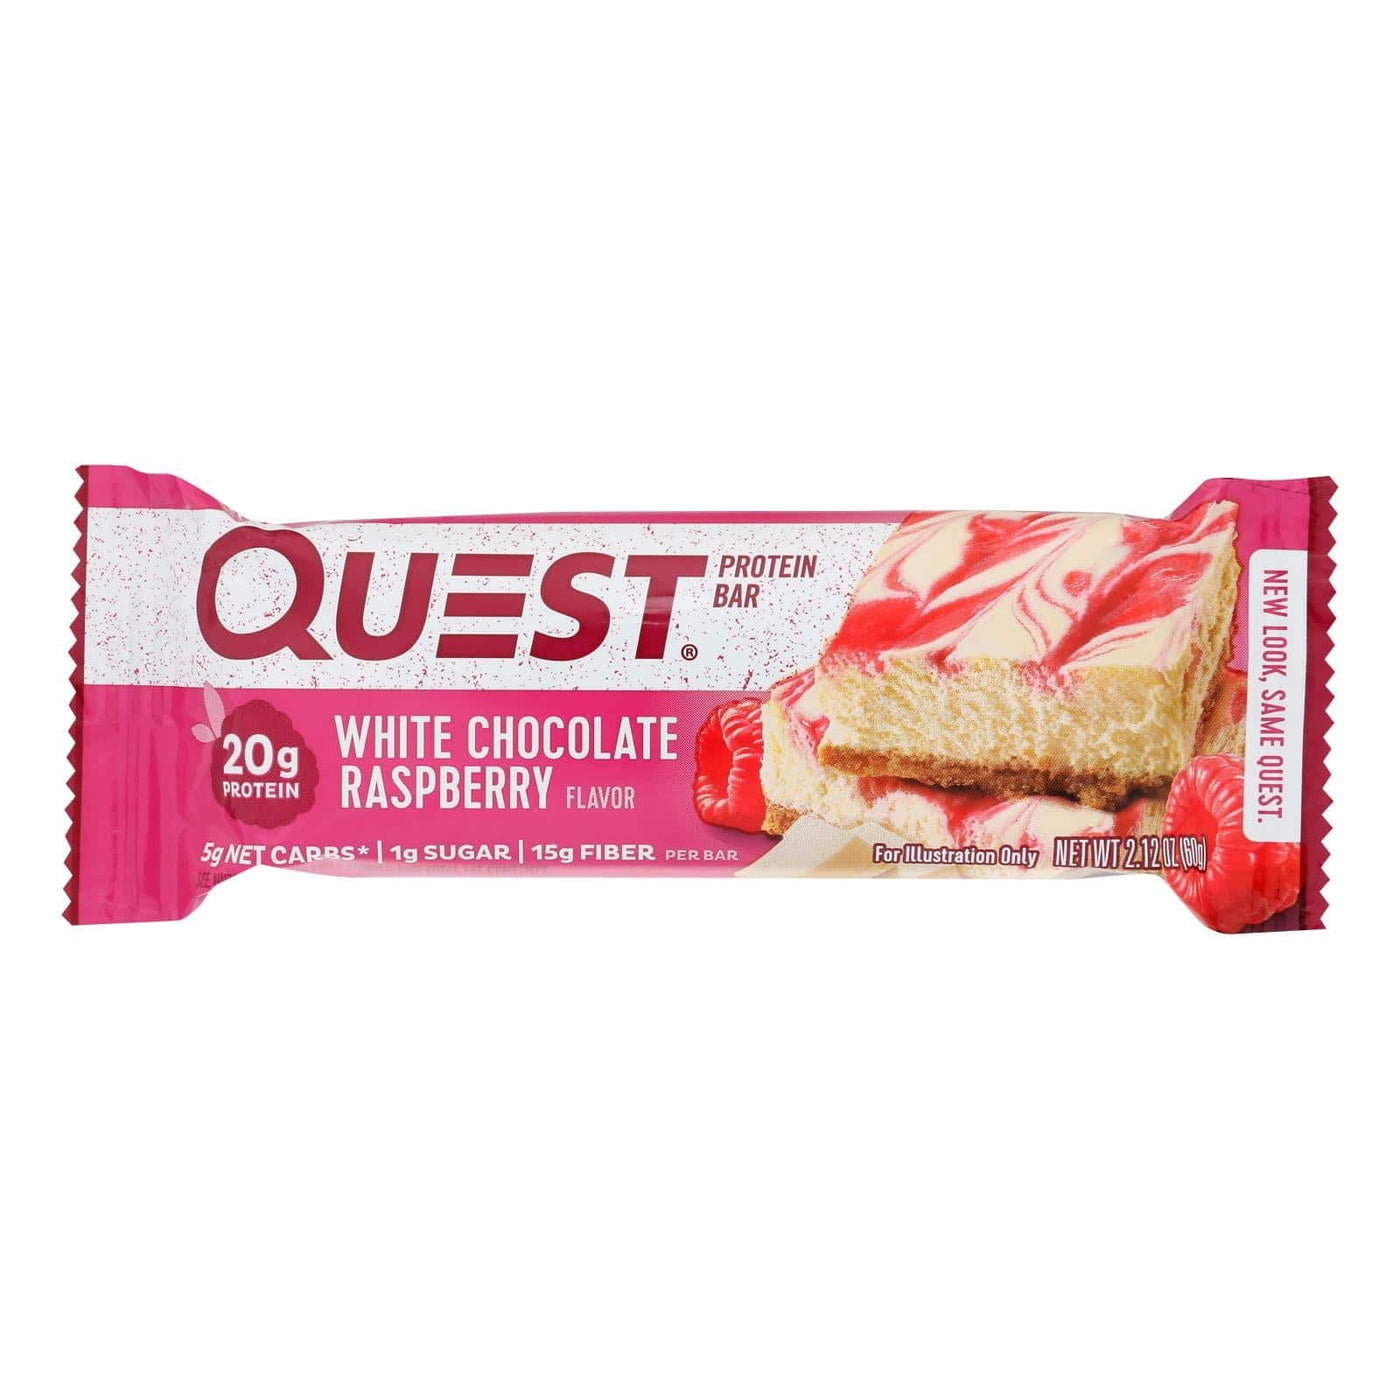 Buy Quest Bar - White Chocolate Raspberry - 2.12 Oz - Case Of 12  at OnlyNaturals.us